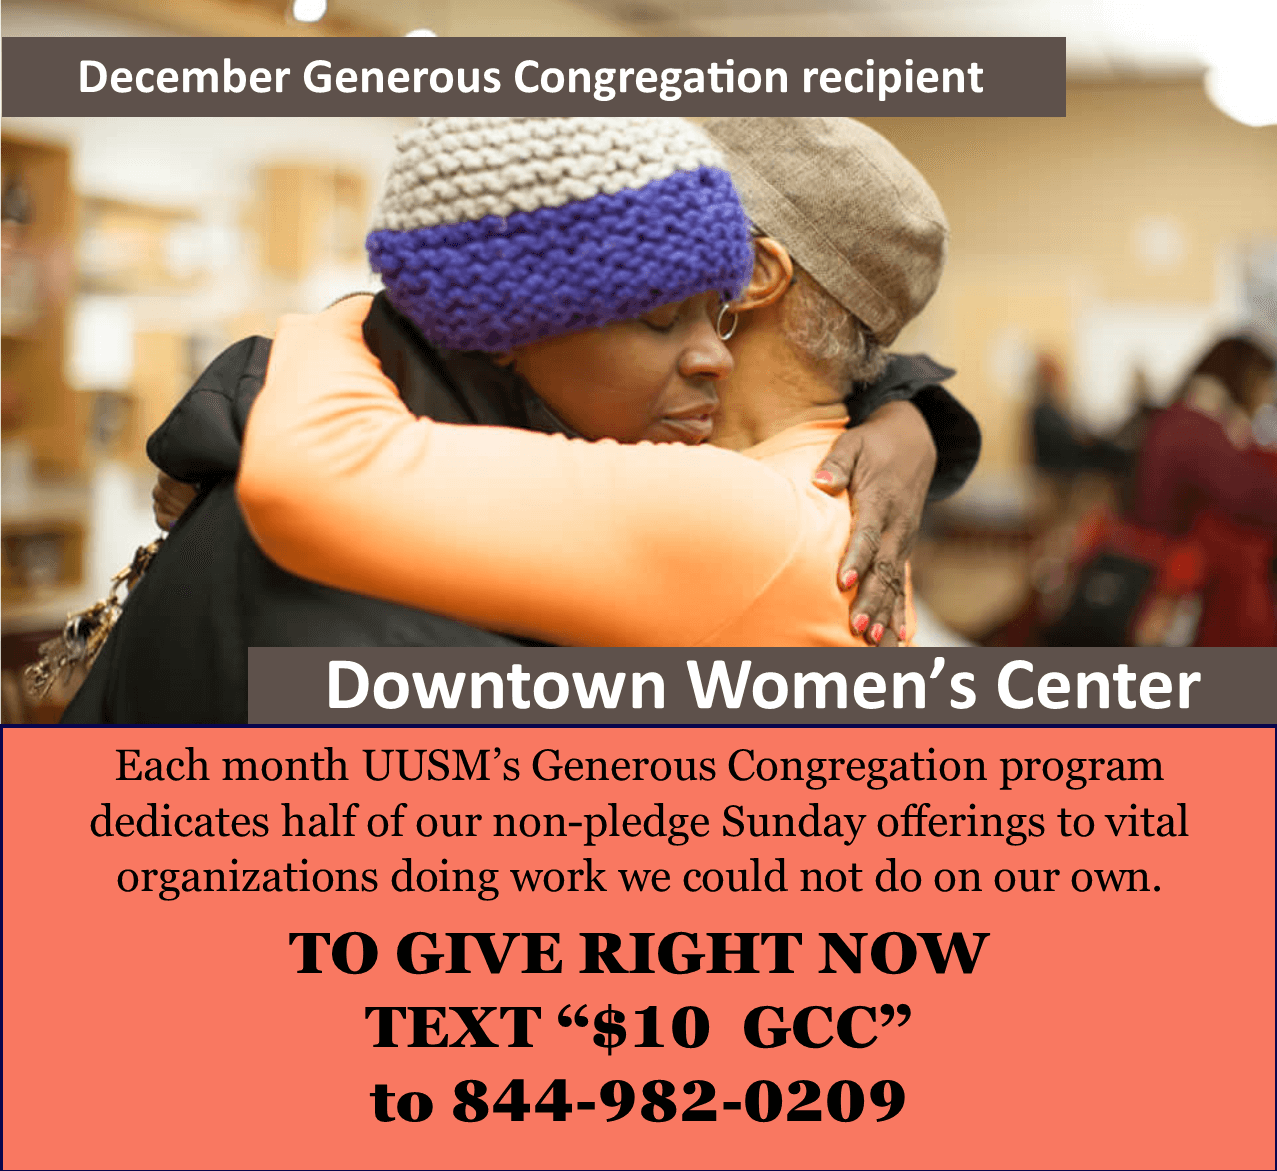 Please support UUSM and the Downtown Women's Center